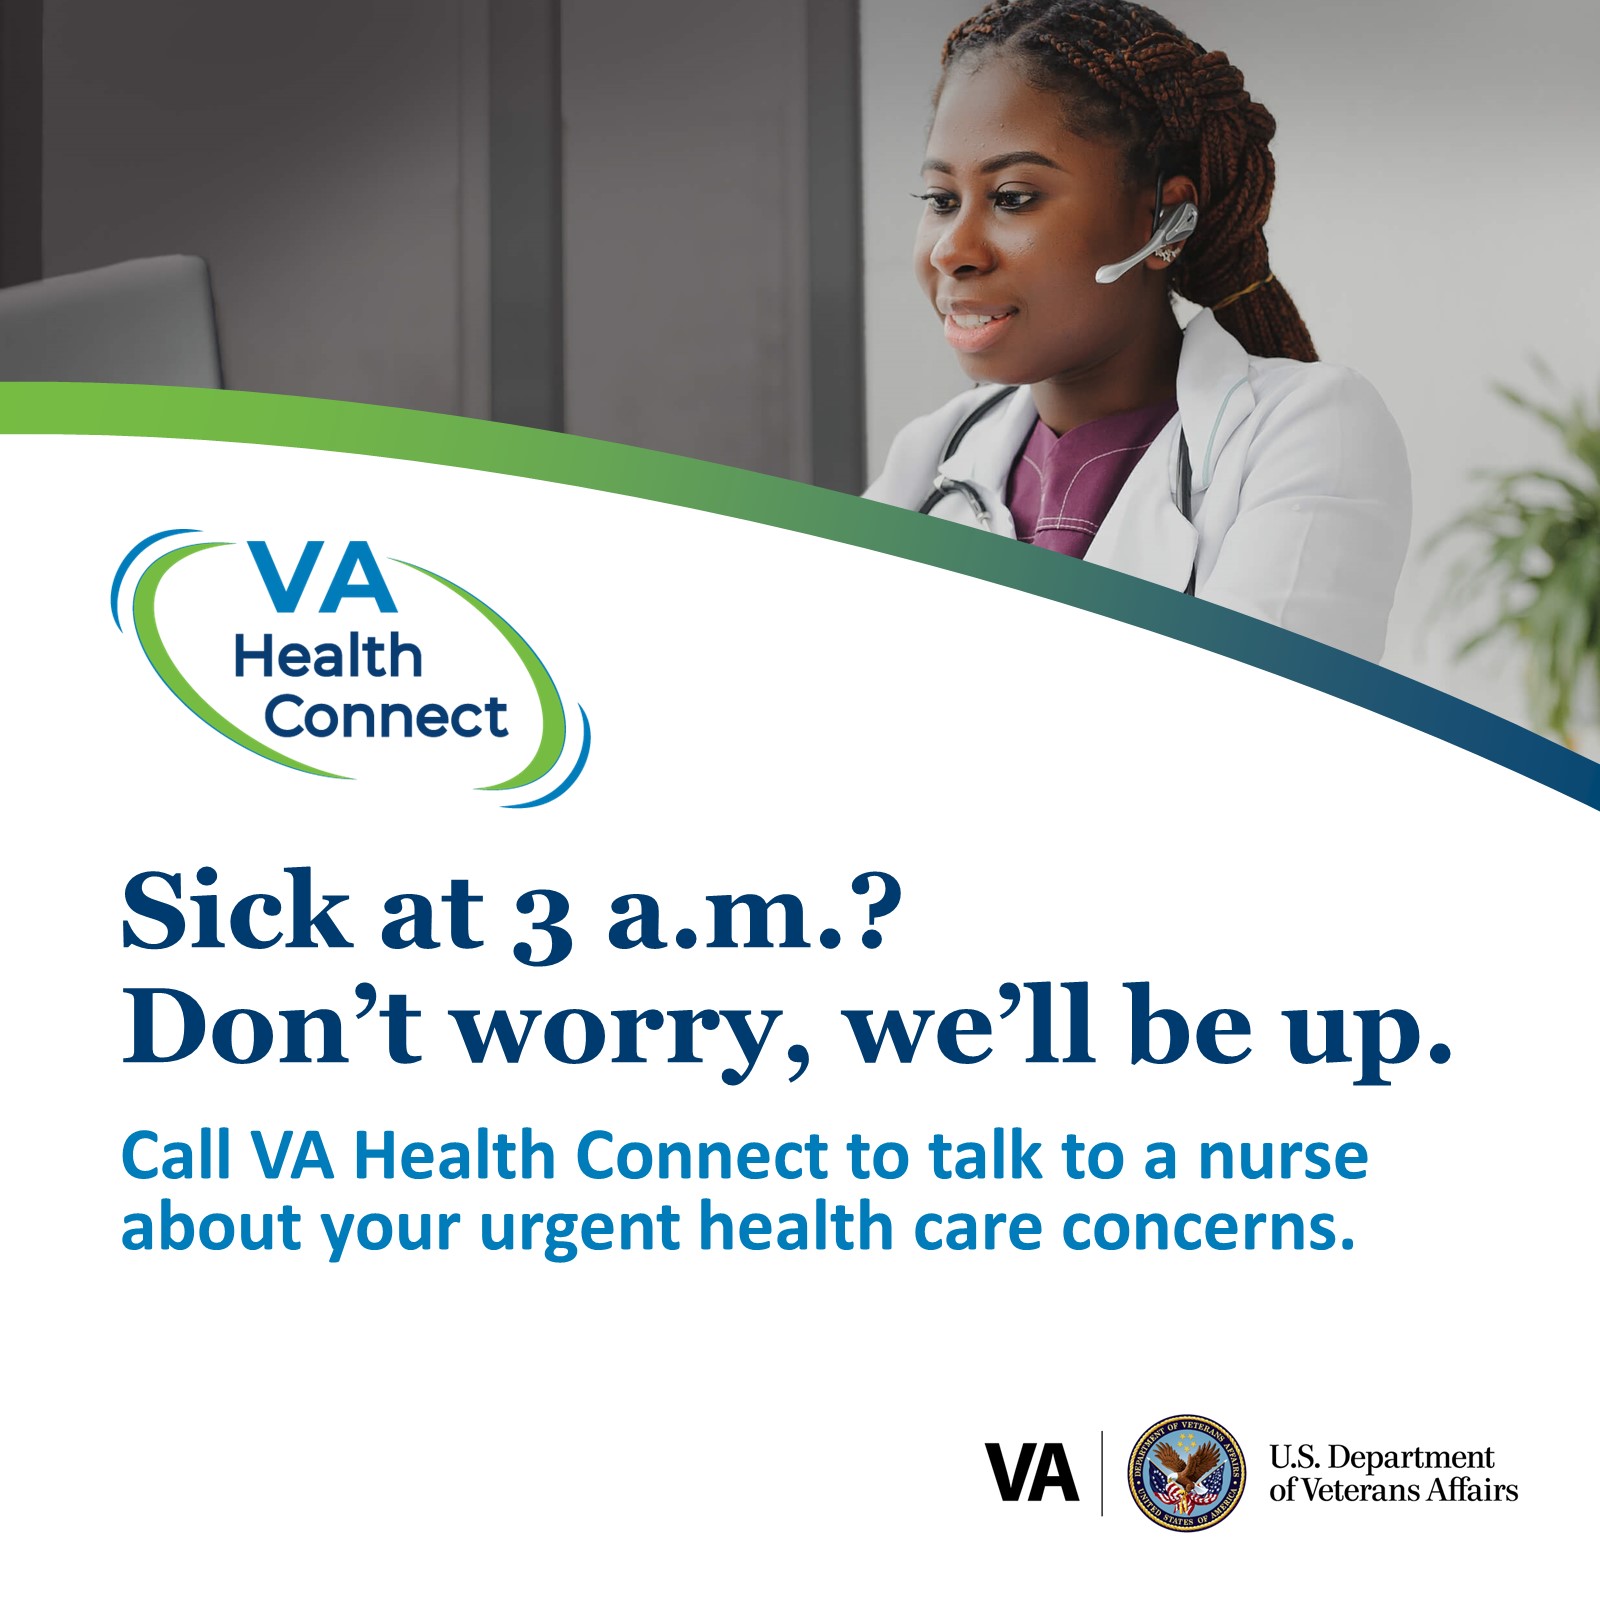 A nurse wearing a headset, the V-A Health Connect graphic, and text